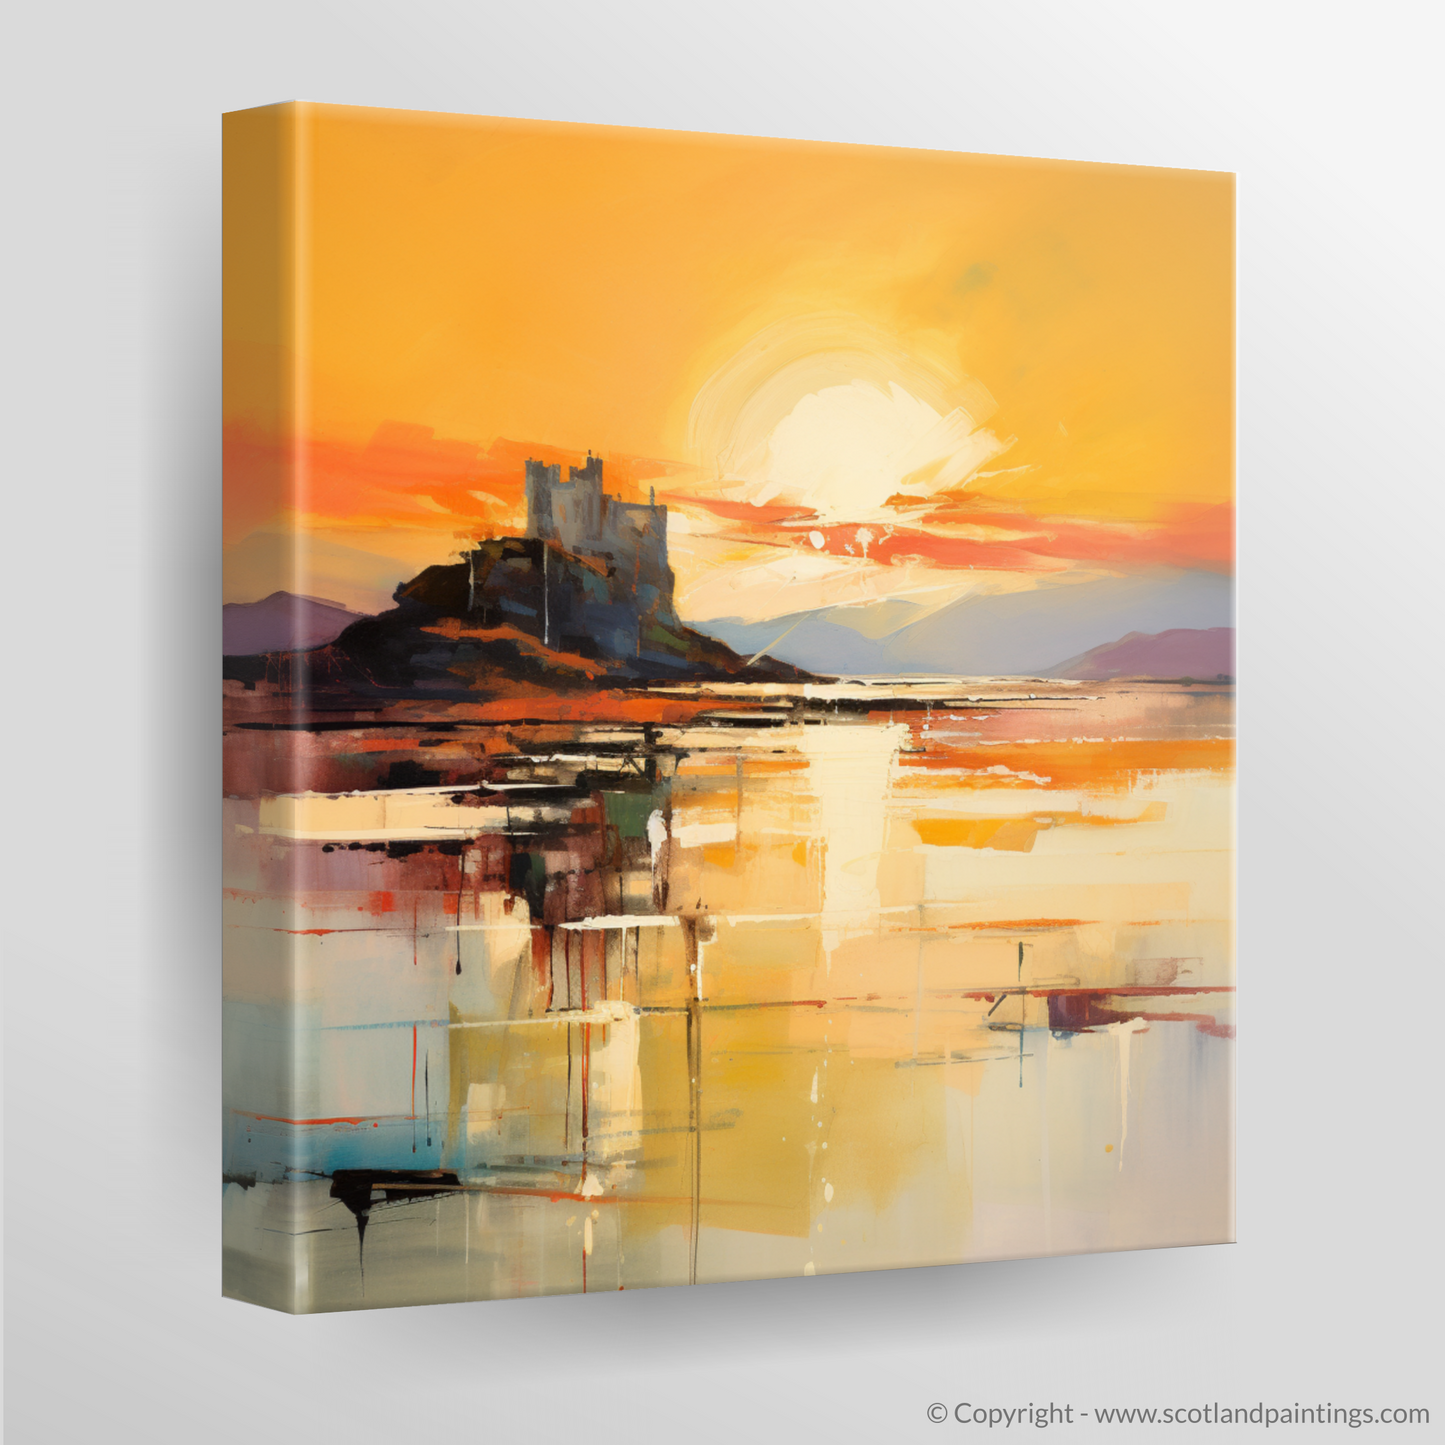 Golden Hour at Castle Stalker Bay - An Abstract Ode to Scottish Coves